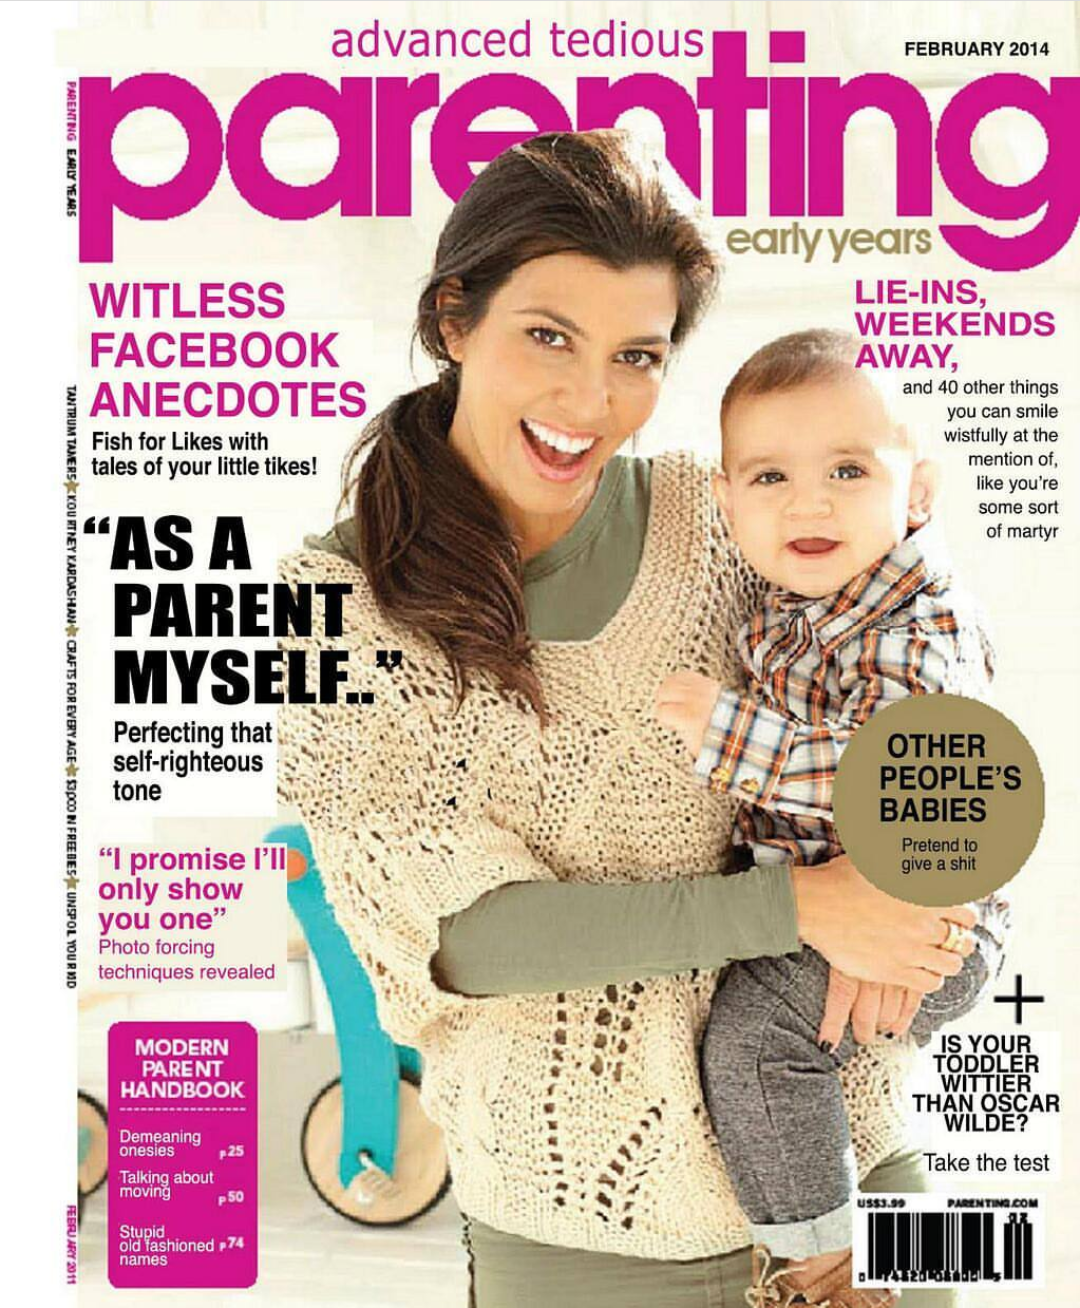 parenting magazines - advanced tedious parenting early years LieIns, Weekends Away and 40 other things you can smile wistfully at the mention of you're some sort of martyr Witless Facebook Anecdotes Fish for with tales of your little tikes! "As A Parent M